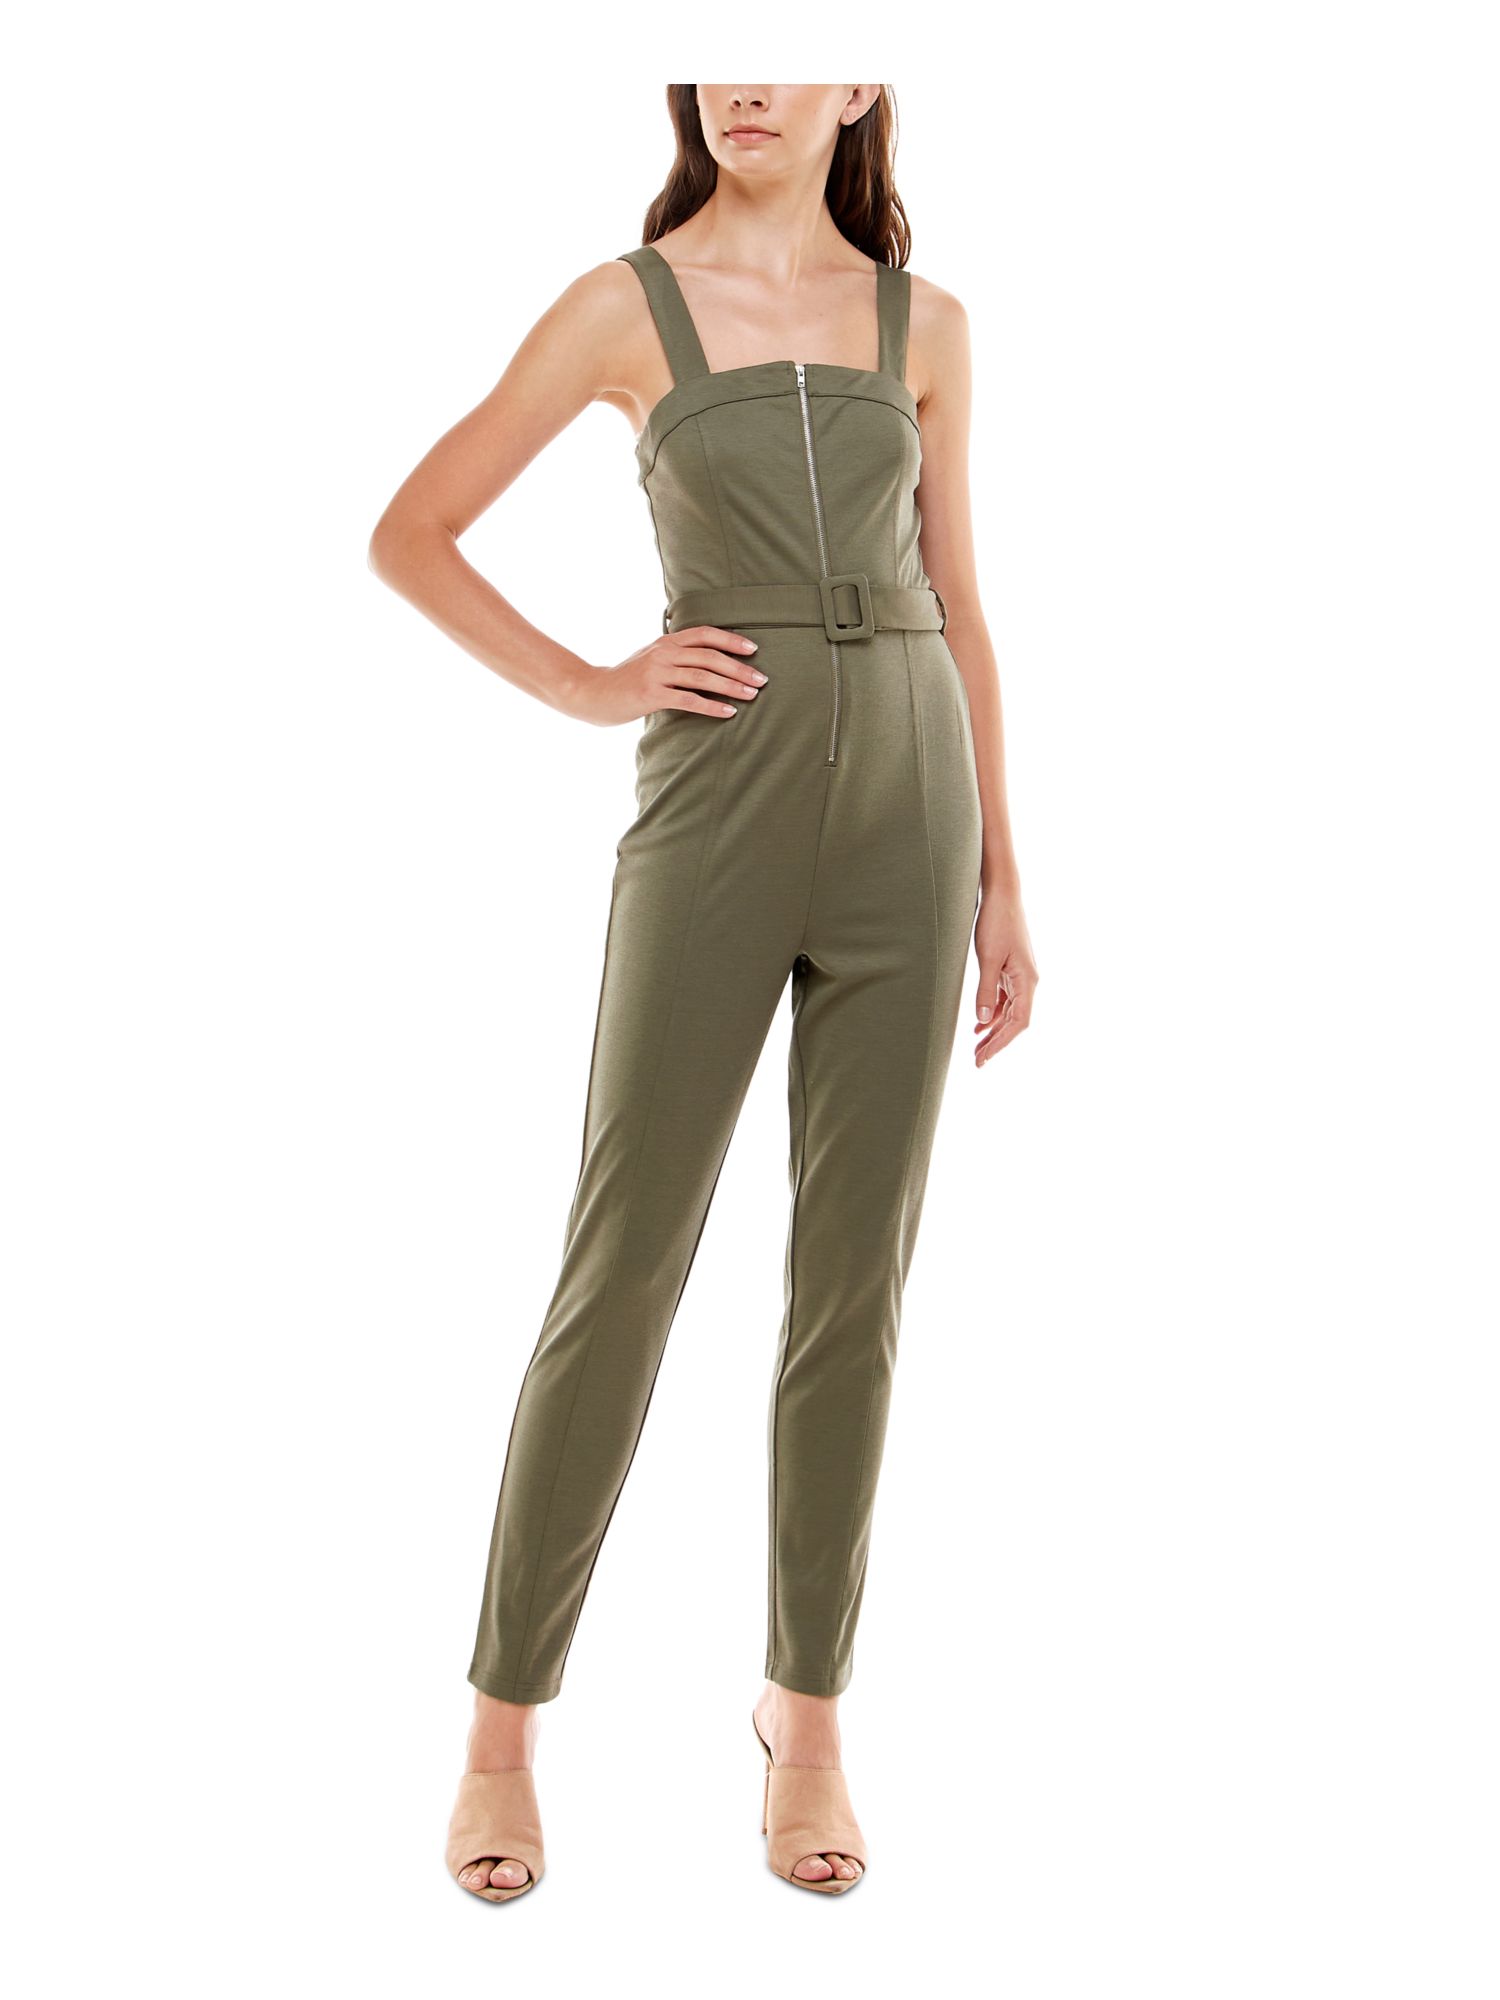 ALMOST FAMOUS Womens Green Belted Zippered Sleeveless Square Neck Skinny Jumpsuit Juniors L